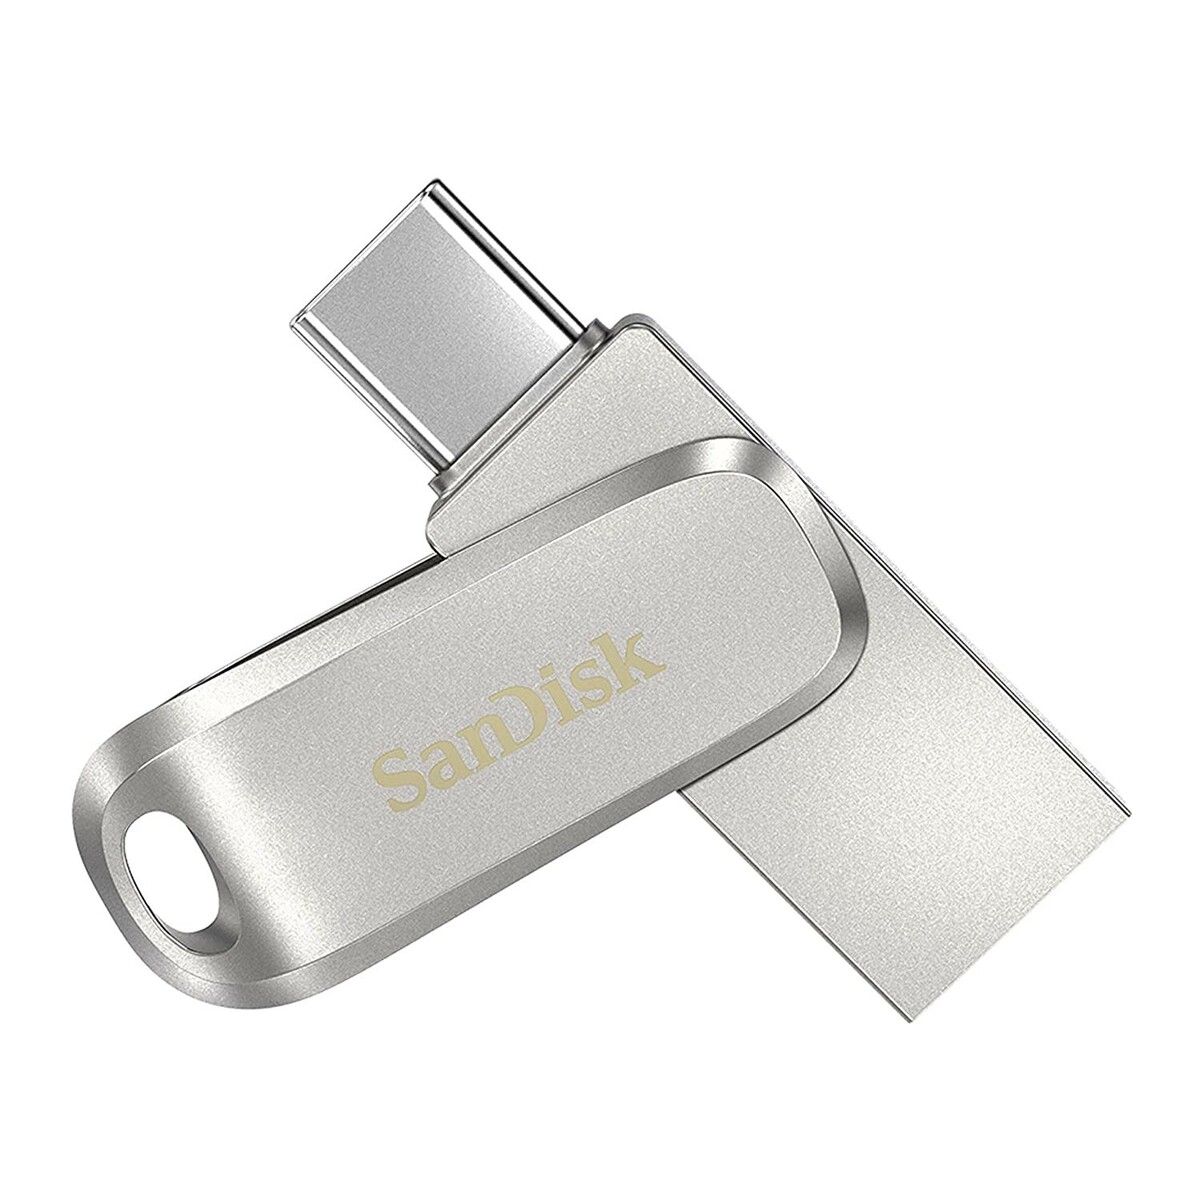 Sandisk USB-C Dual Drive Luxe 64GB